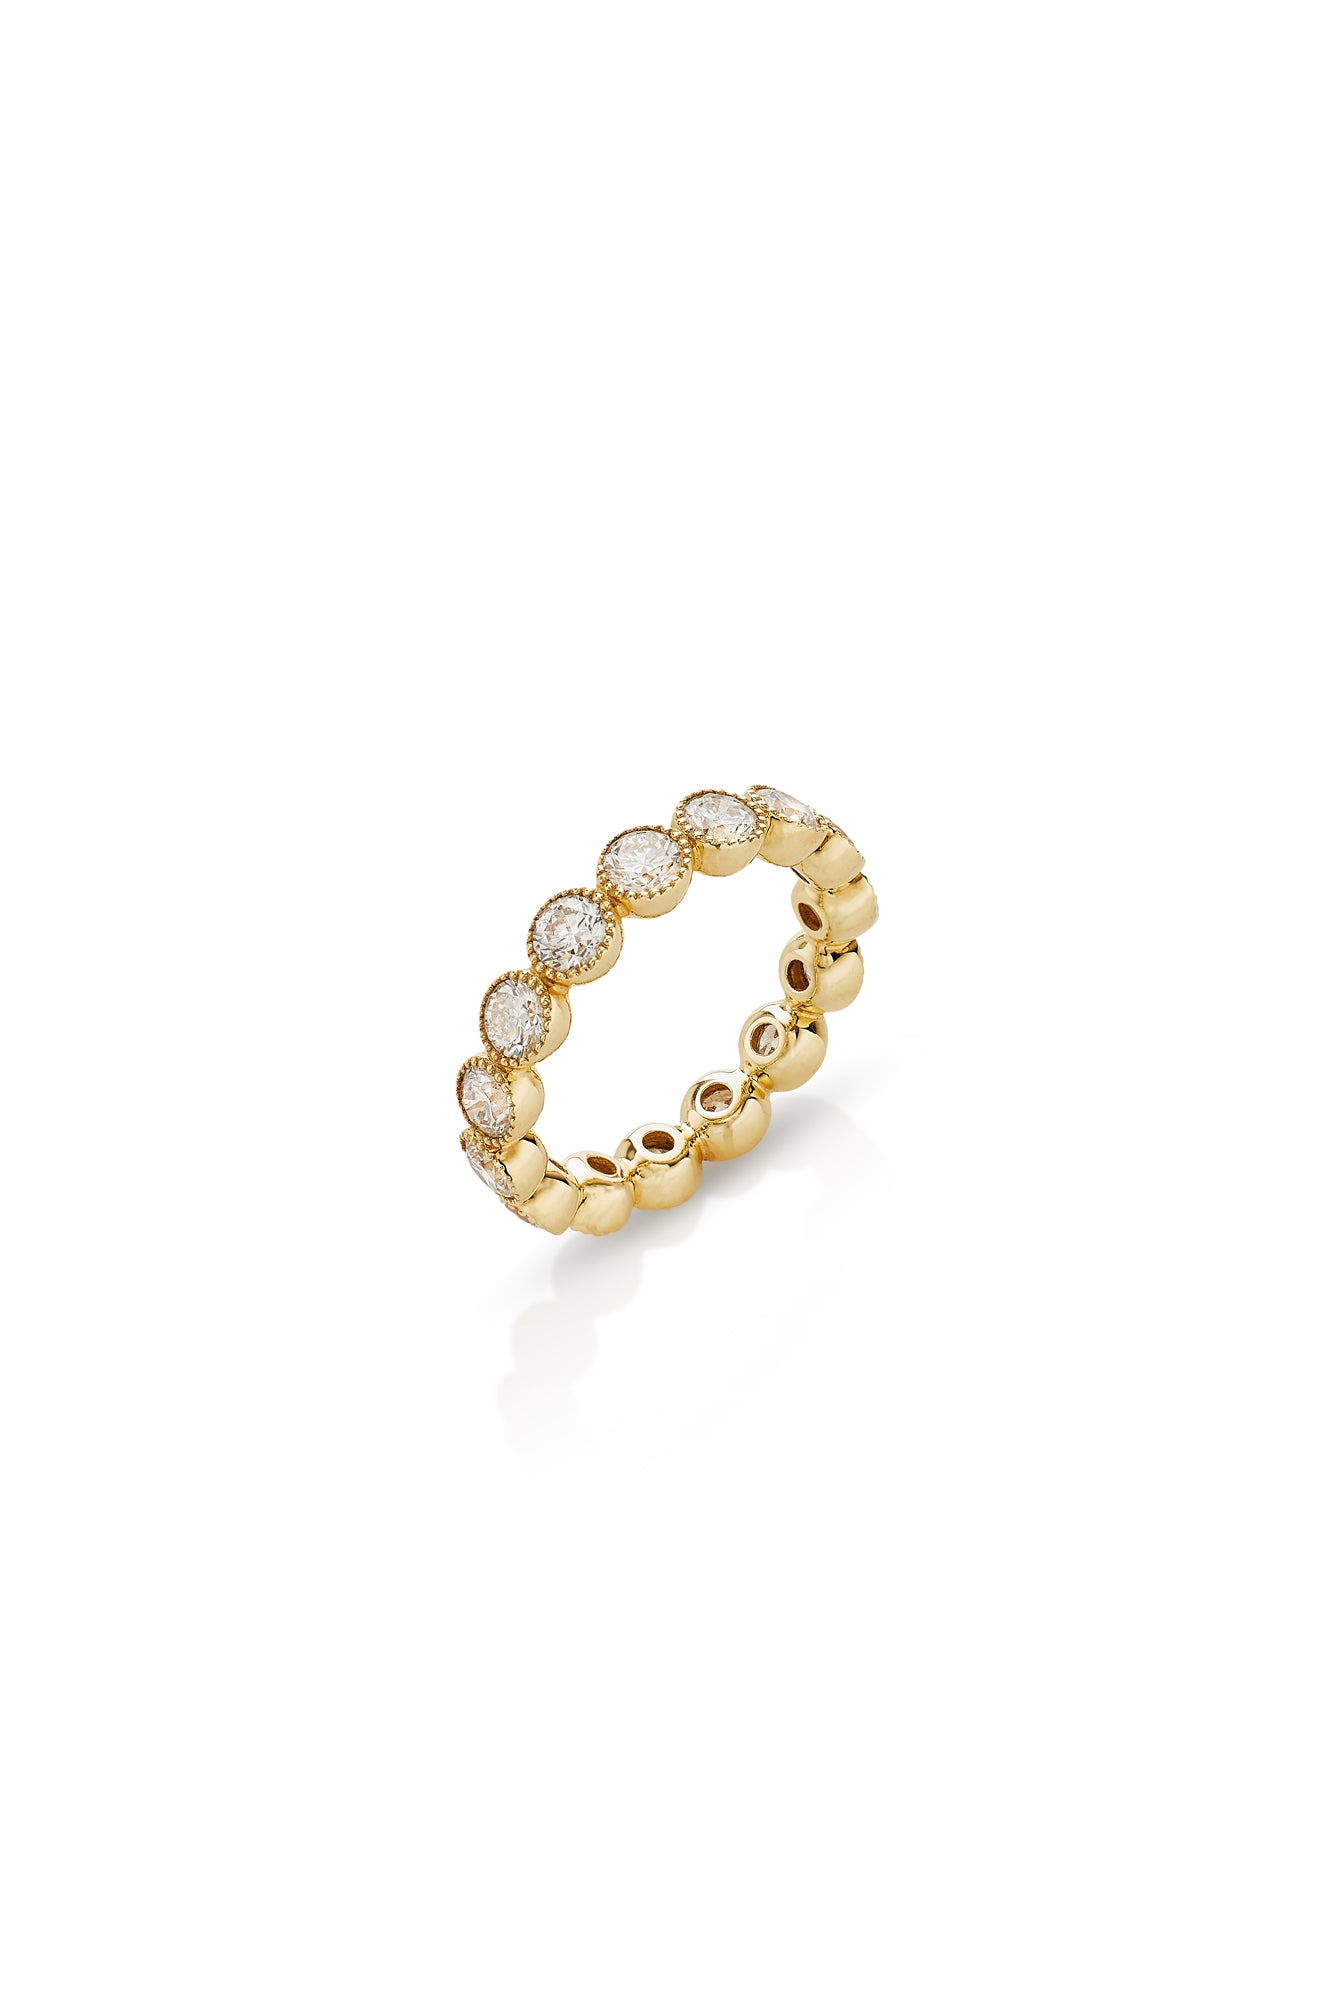 14K Yellow Gold Stackable Diamond Ring